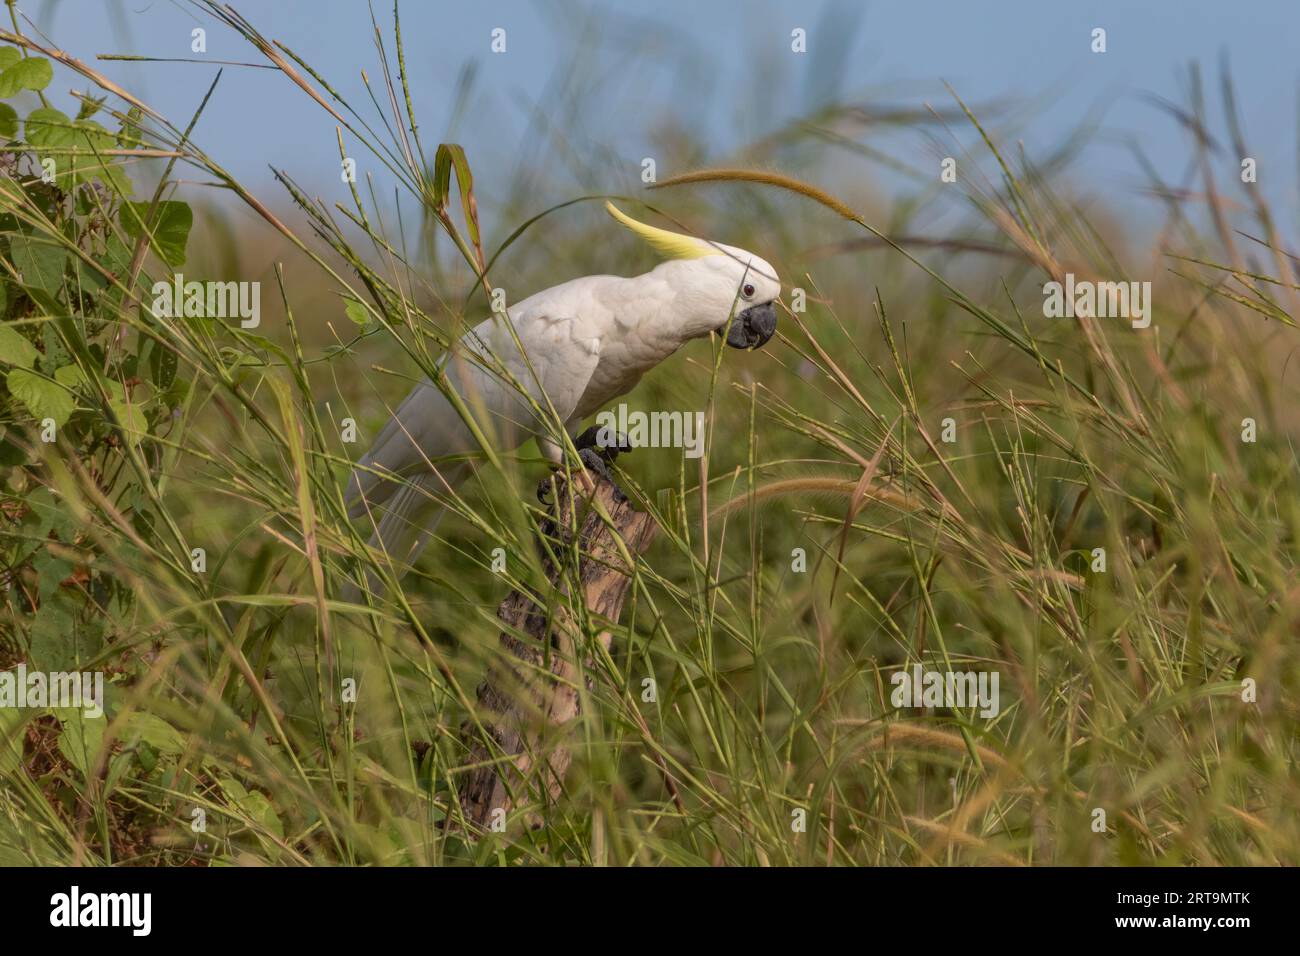 A wild Sulphur-Crested Cockatoo in its natural environment. Stock Photo